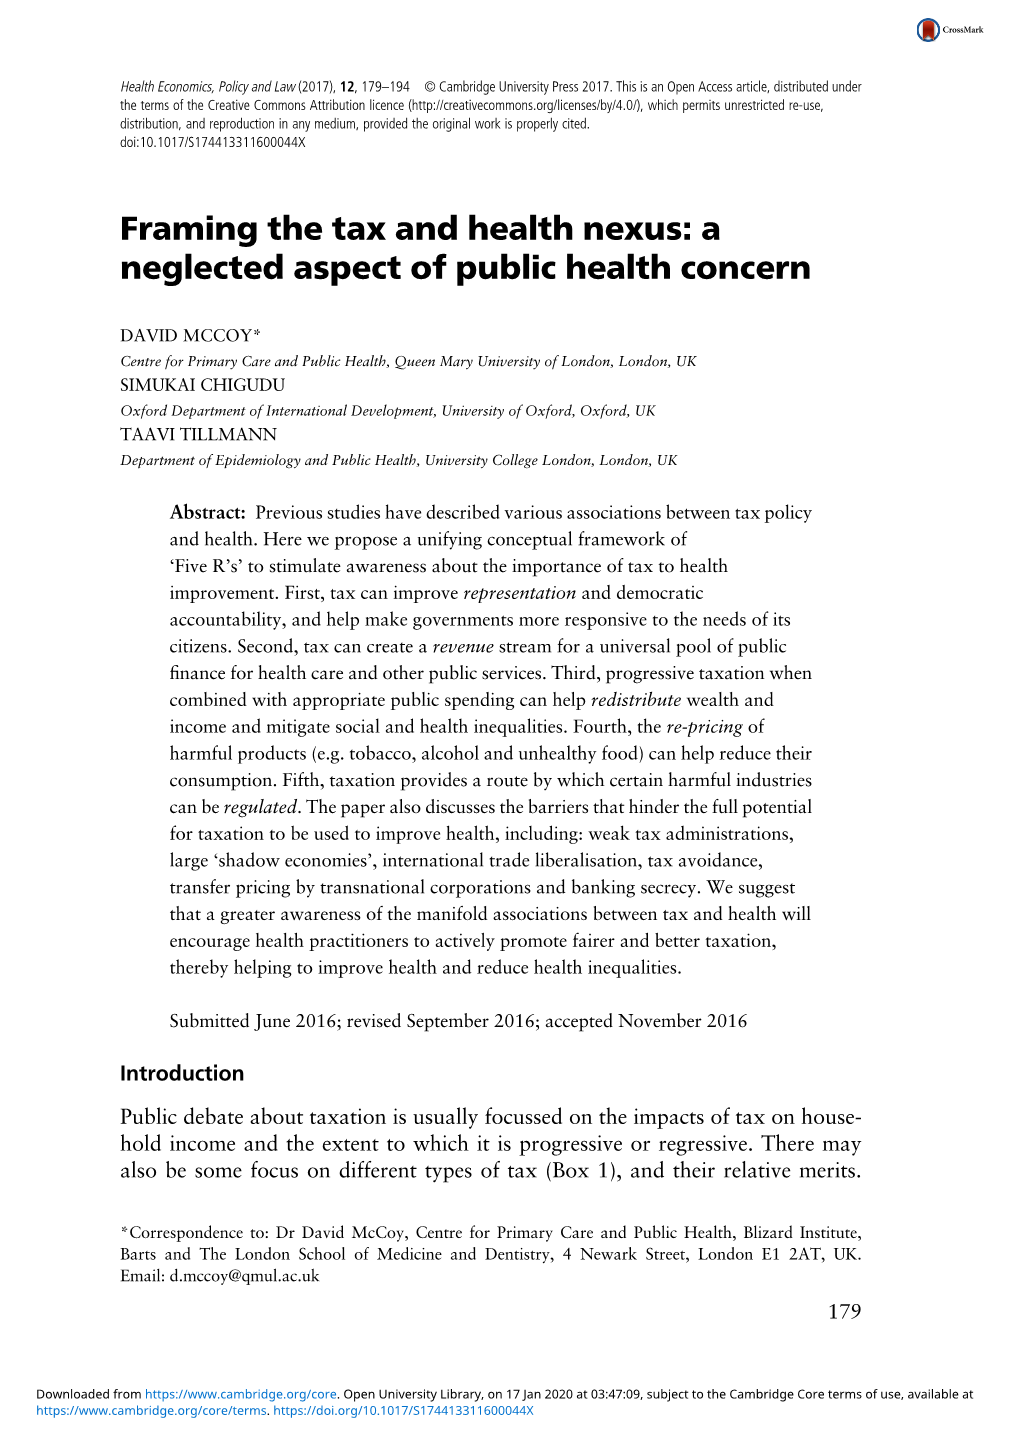 Framing the Tax and Health Nexus: a Neglected Aspect of Public Health Concern